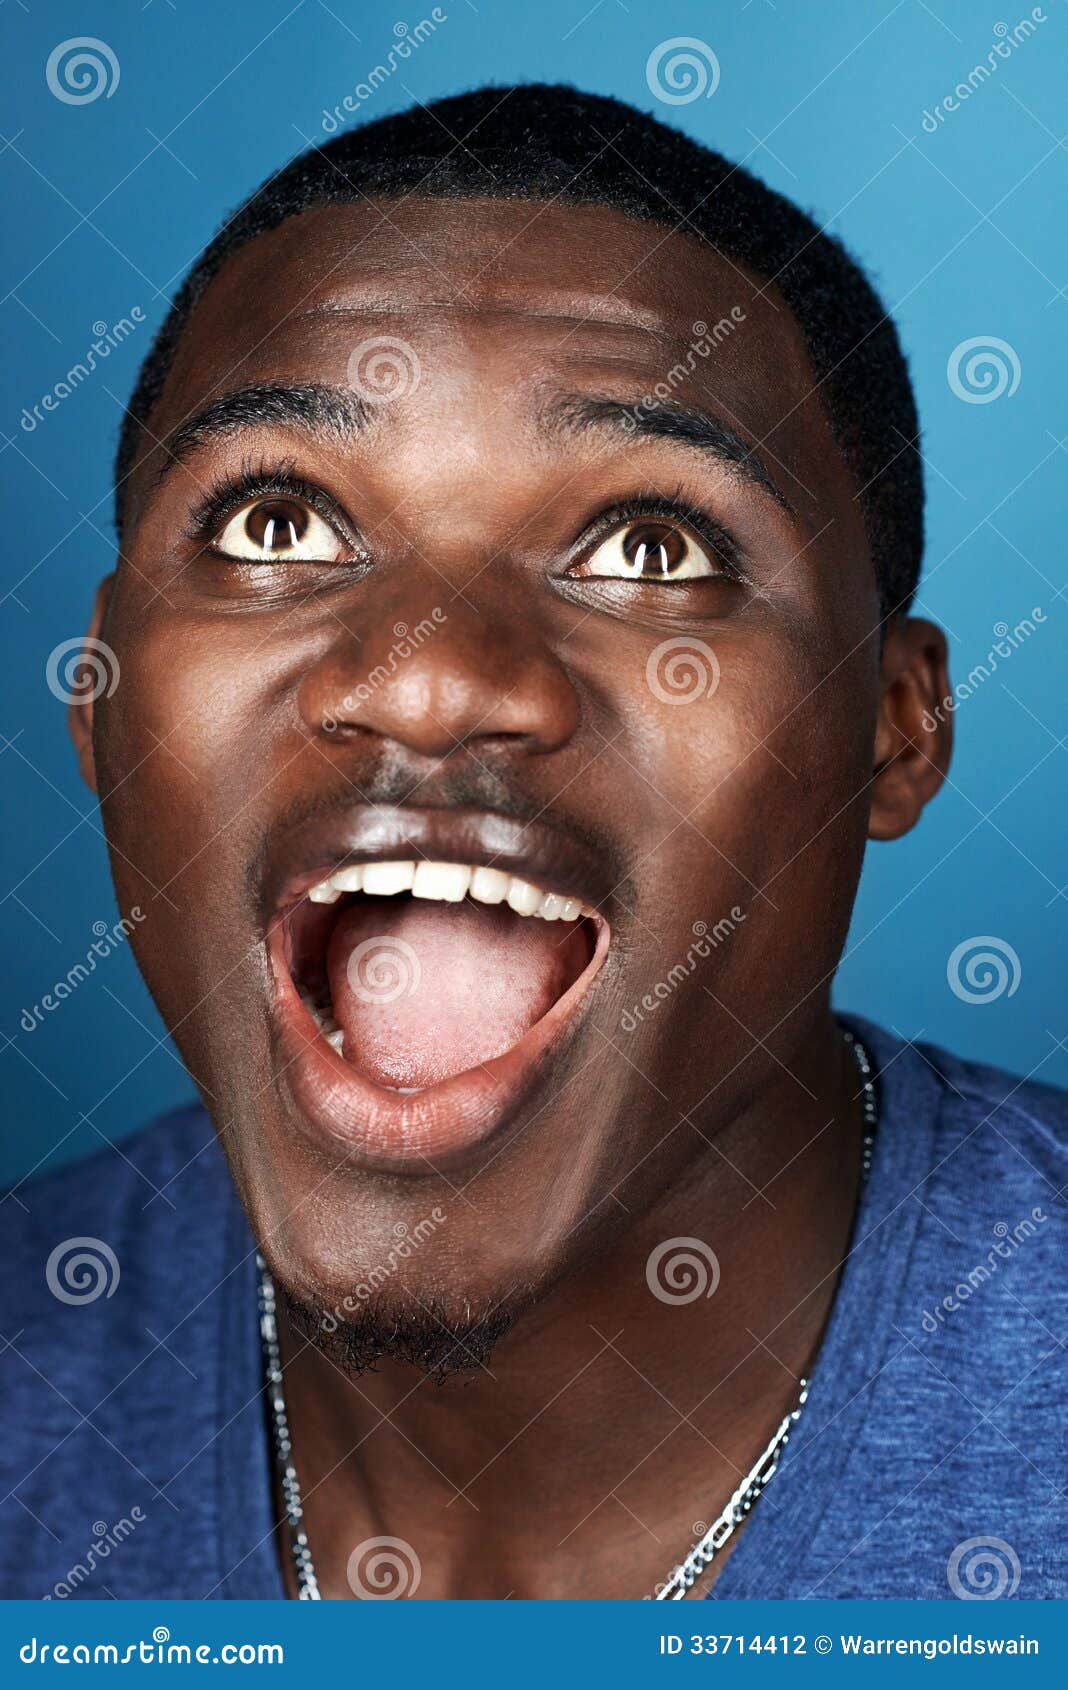 Funny face african man stock photo. Image of expressions 